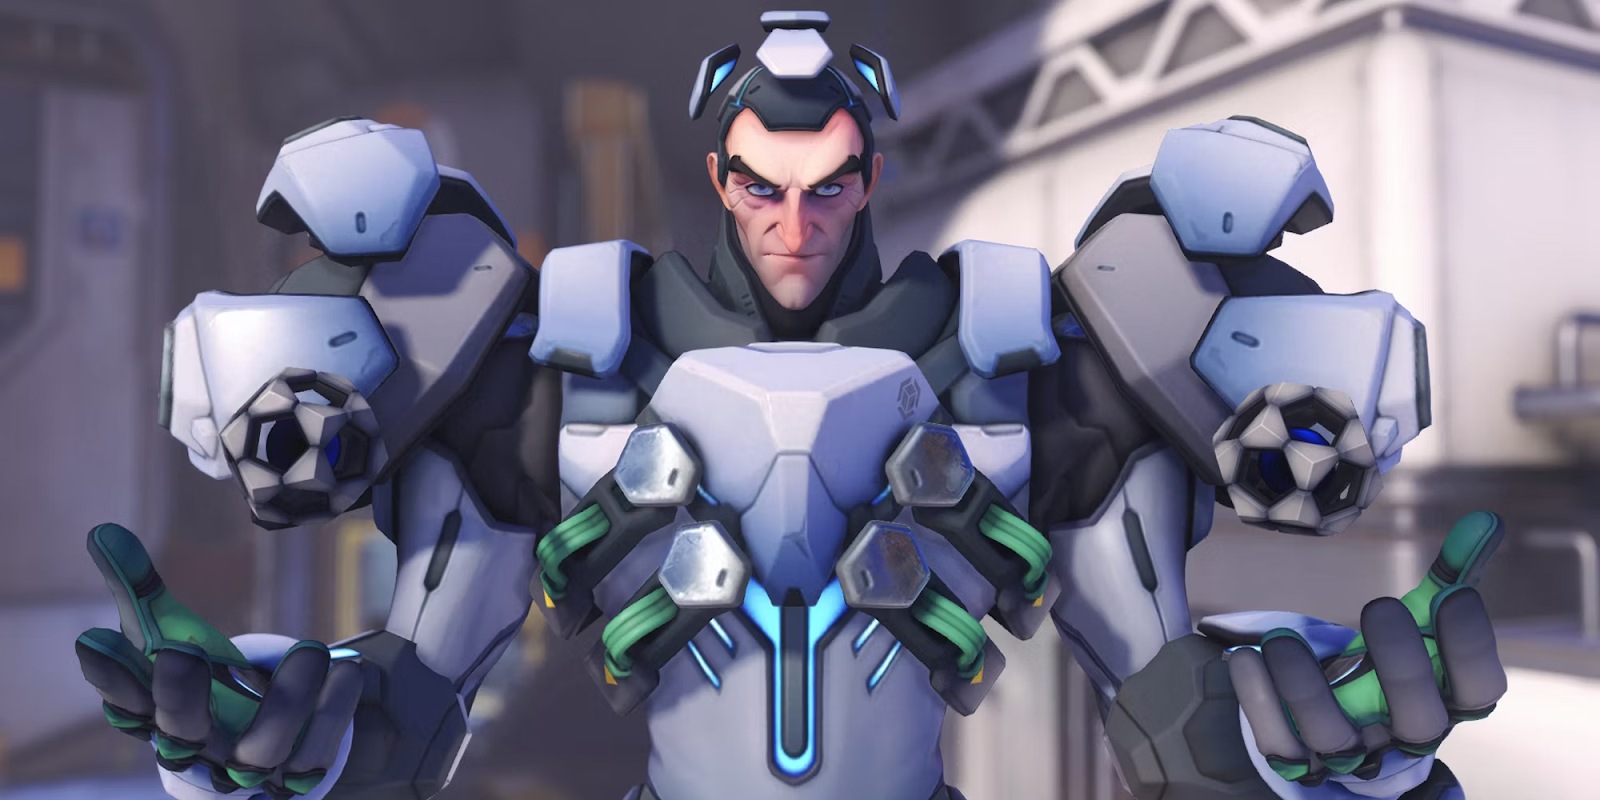 Image of Sigma from Overwatch 2